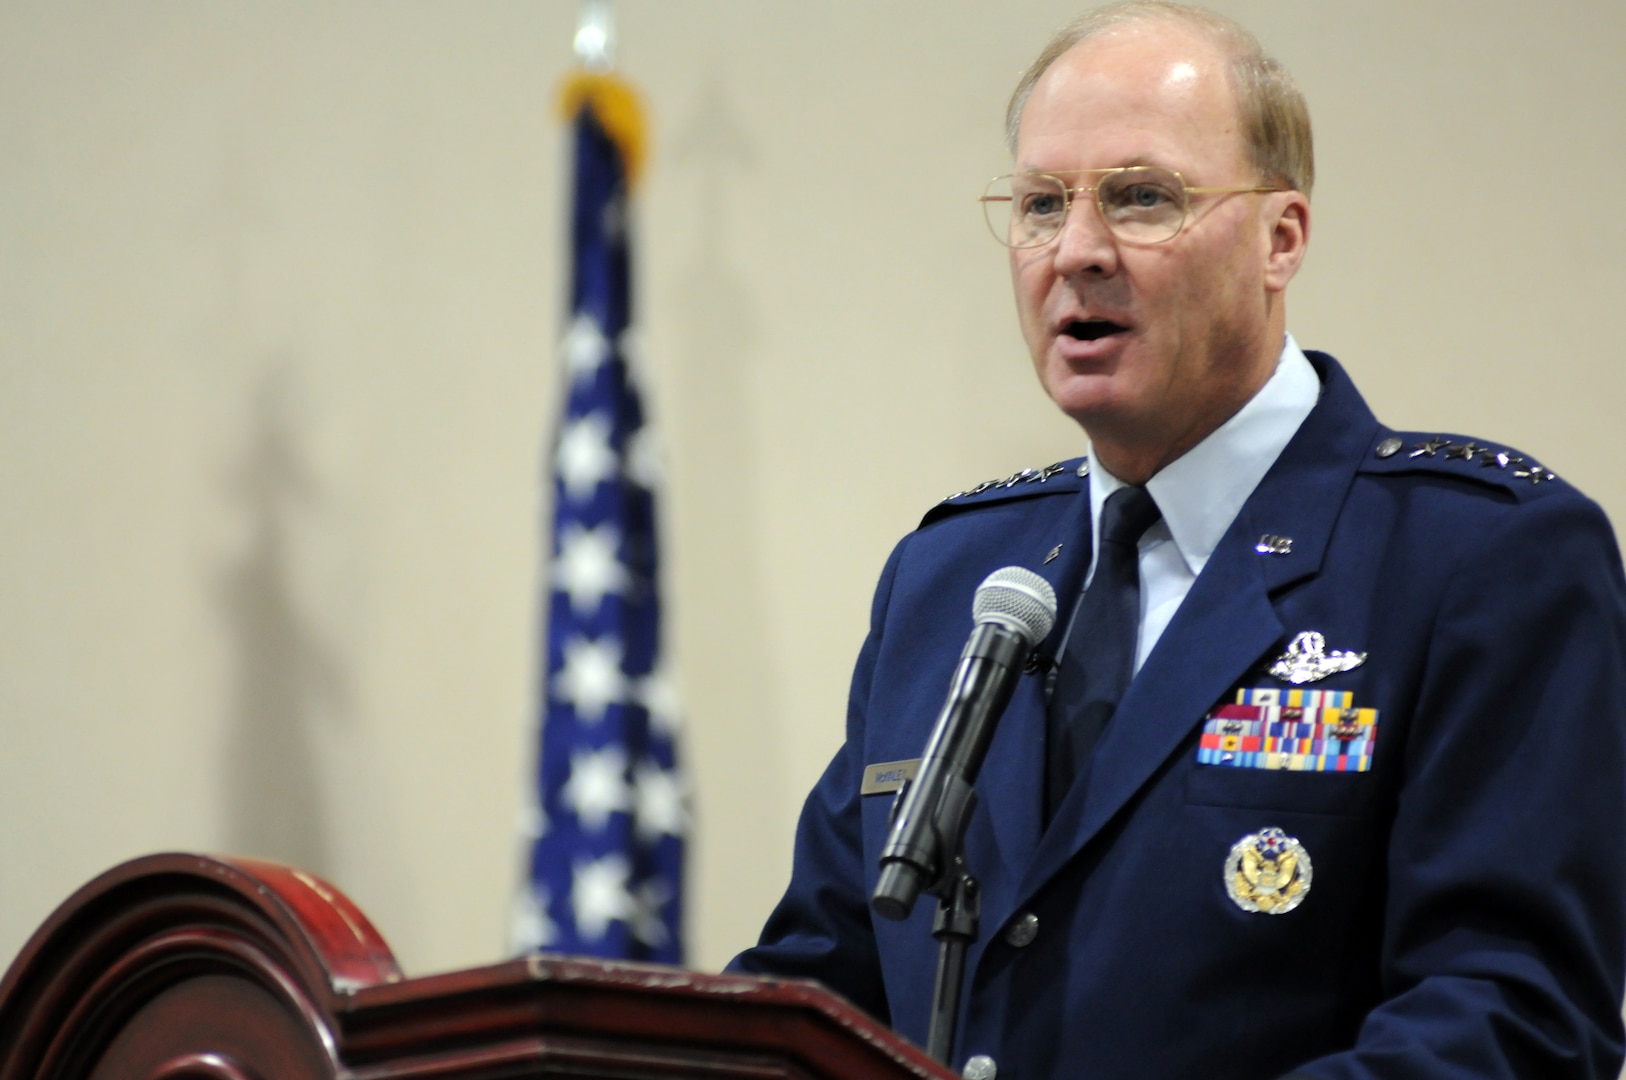 Air Force Gen. Craig McKinley, chief of the National Guard Bureau, speaks during a luncheon at the 40th Annual Tuskegee Airmen, Inc. National Convention, Aug. 5, 2011 in Oxon Hill, Md. The convention honored the 70th anniversary of the start of the Tuskegee Airmen Experience and was one of the largest gatherings of Original Tuskegee Airmen in recent history.